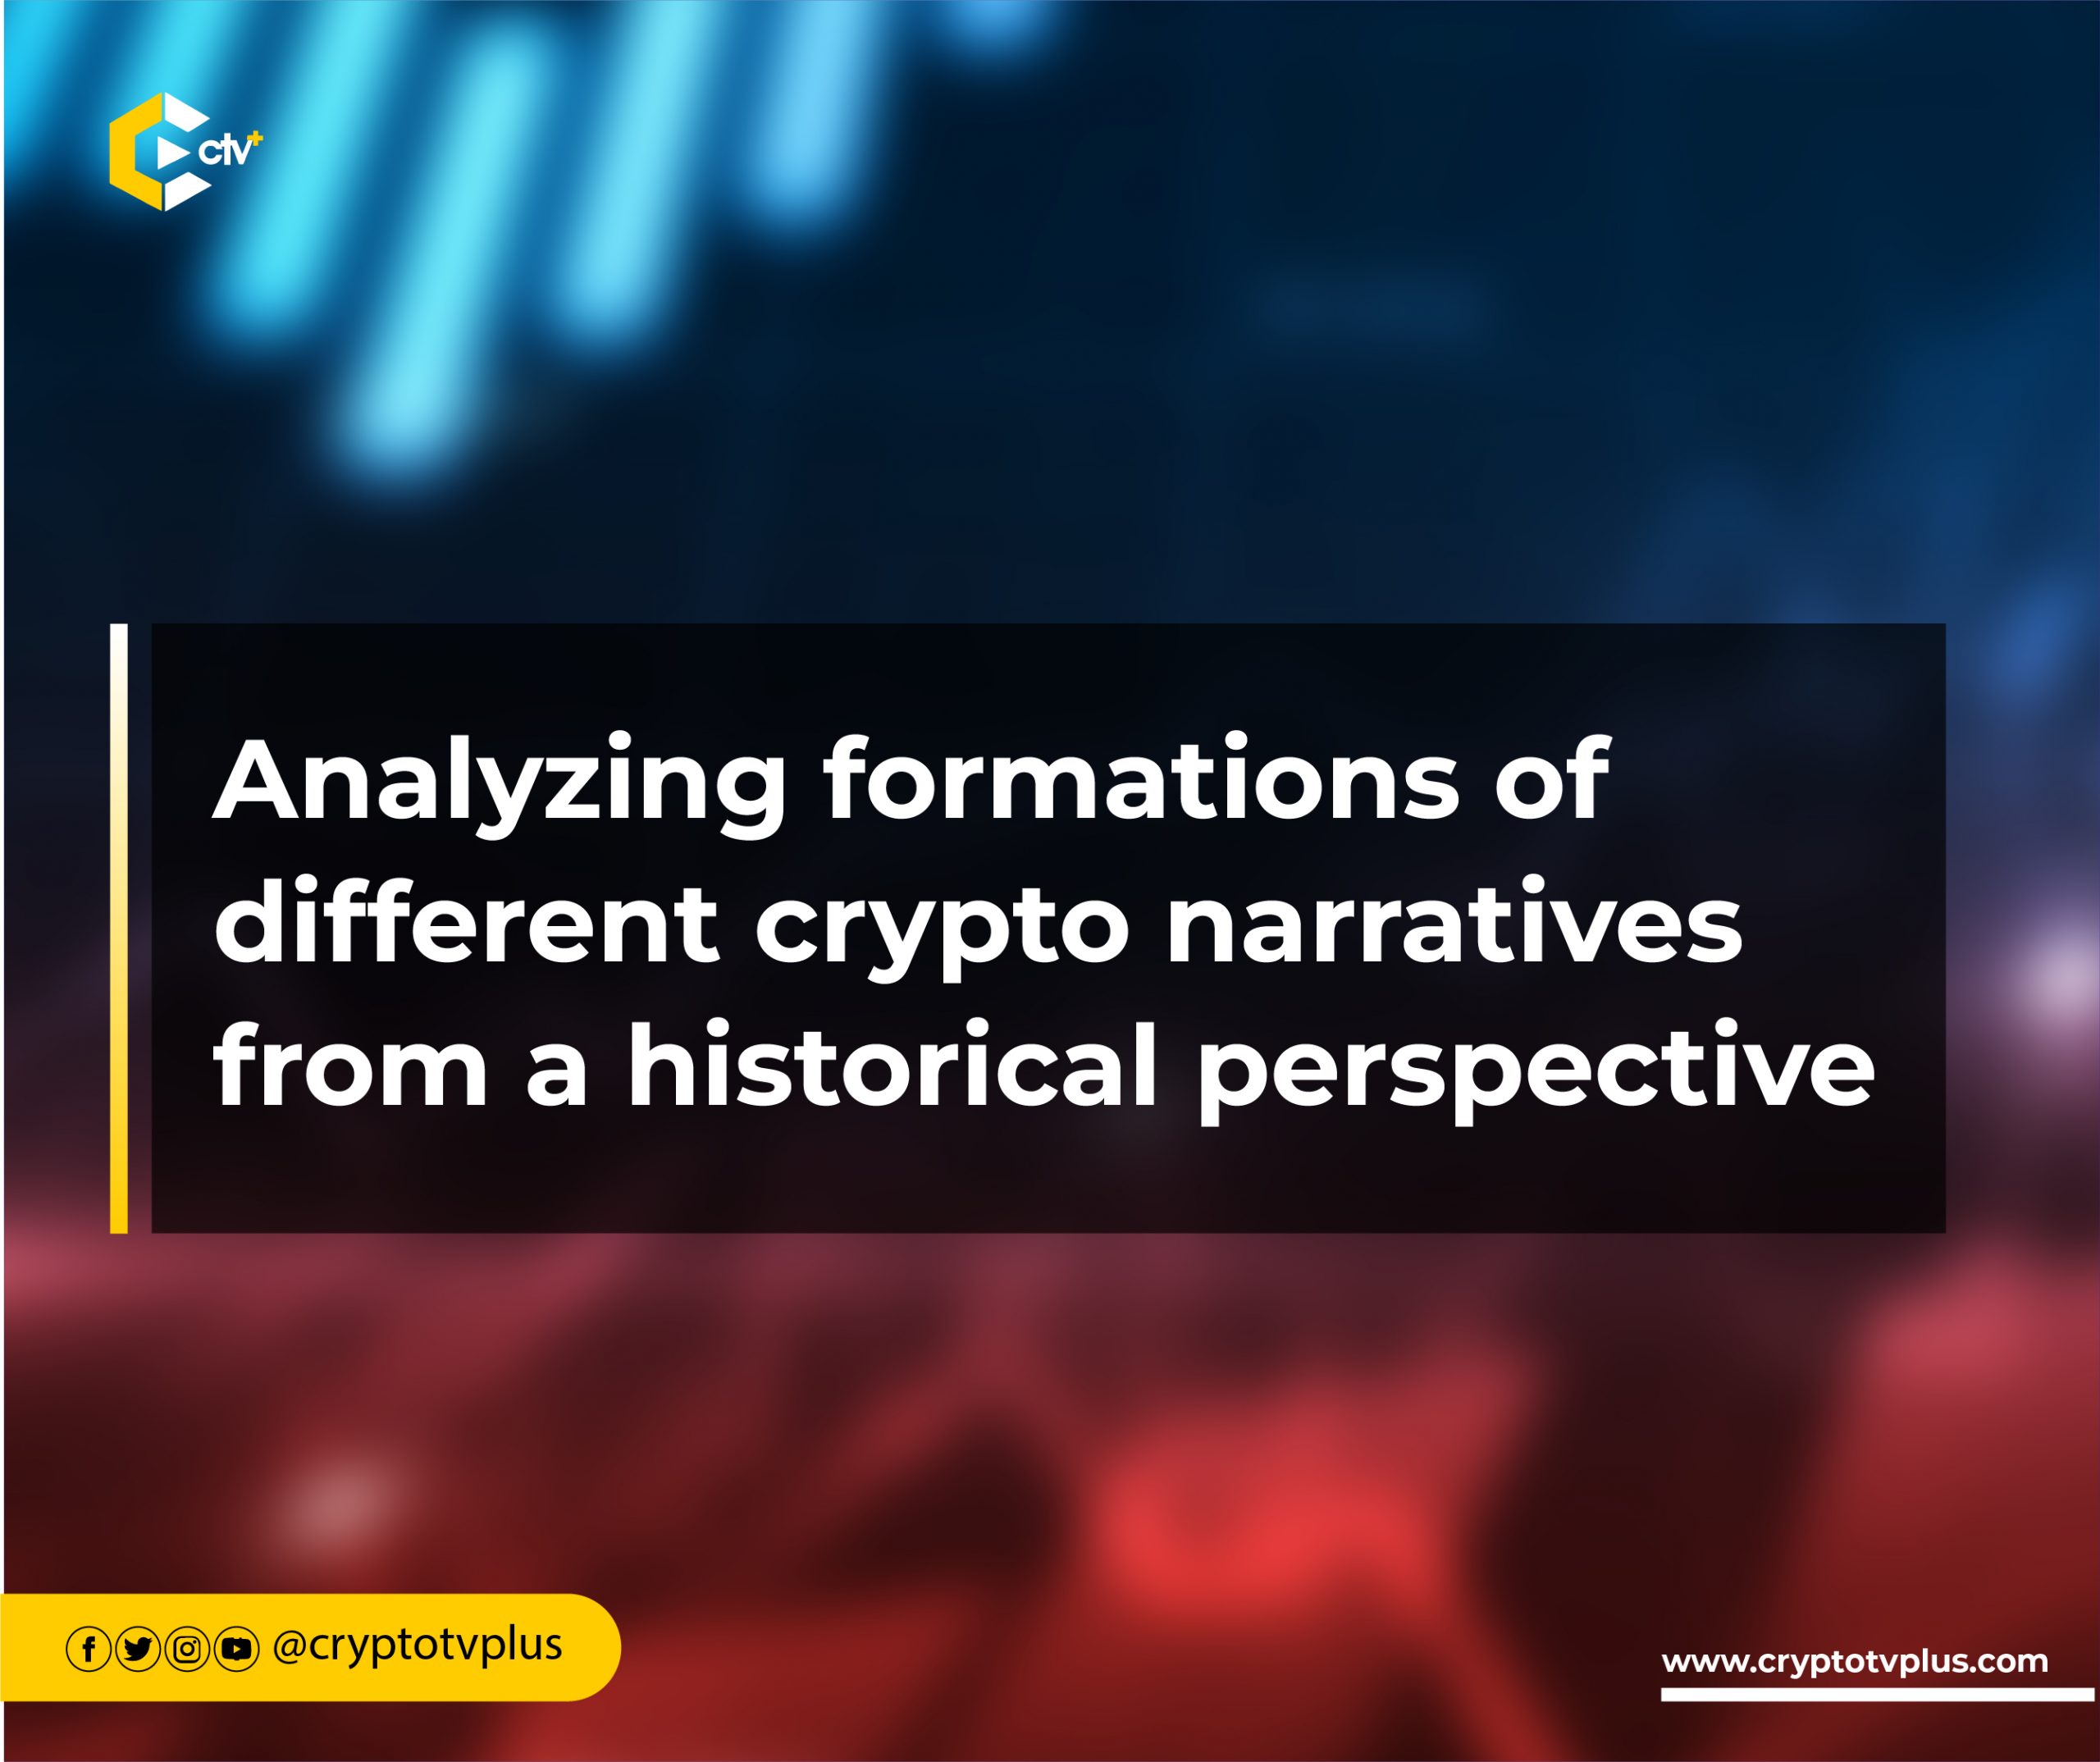 Analyzing formations of different crypto narratives from a historical perspective